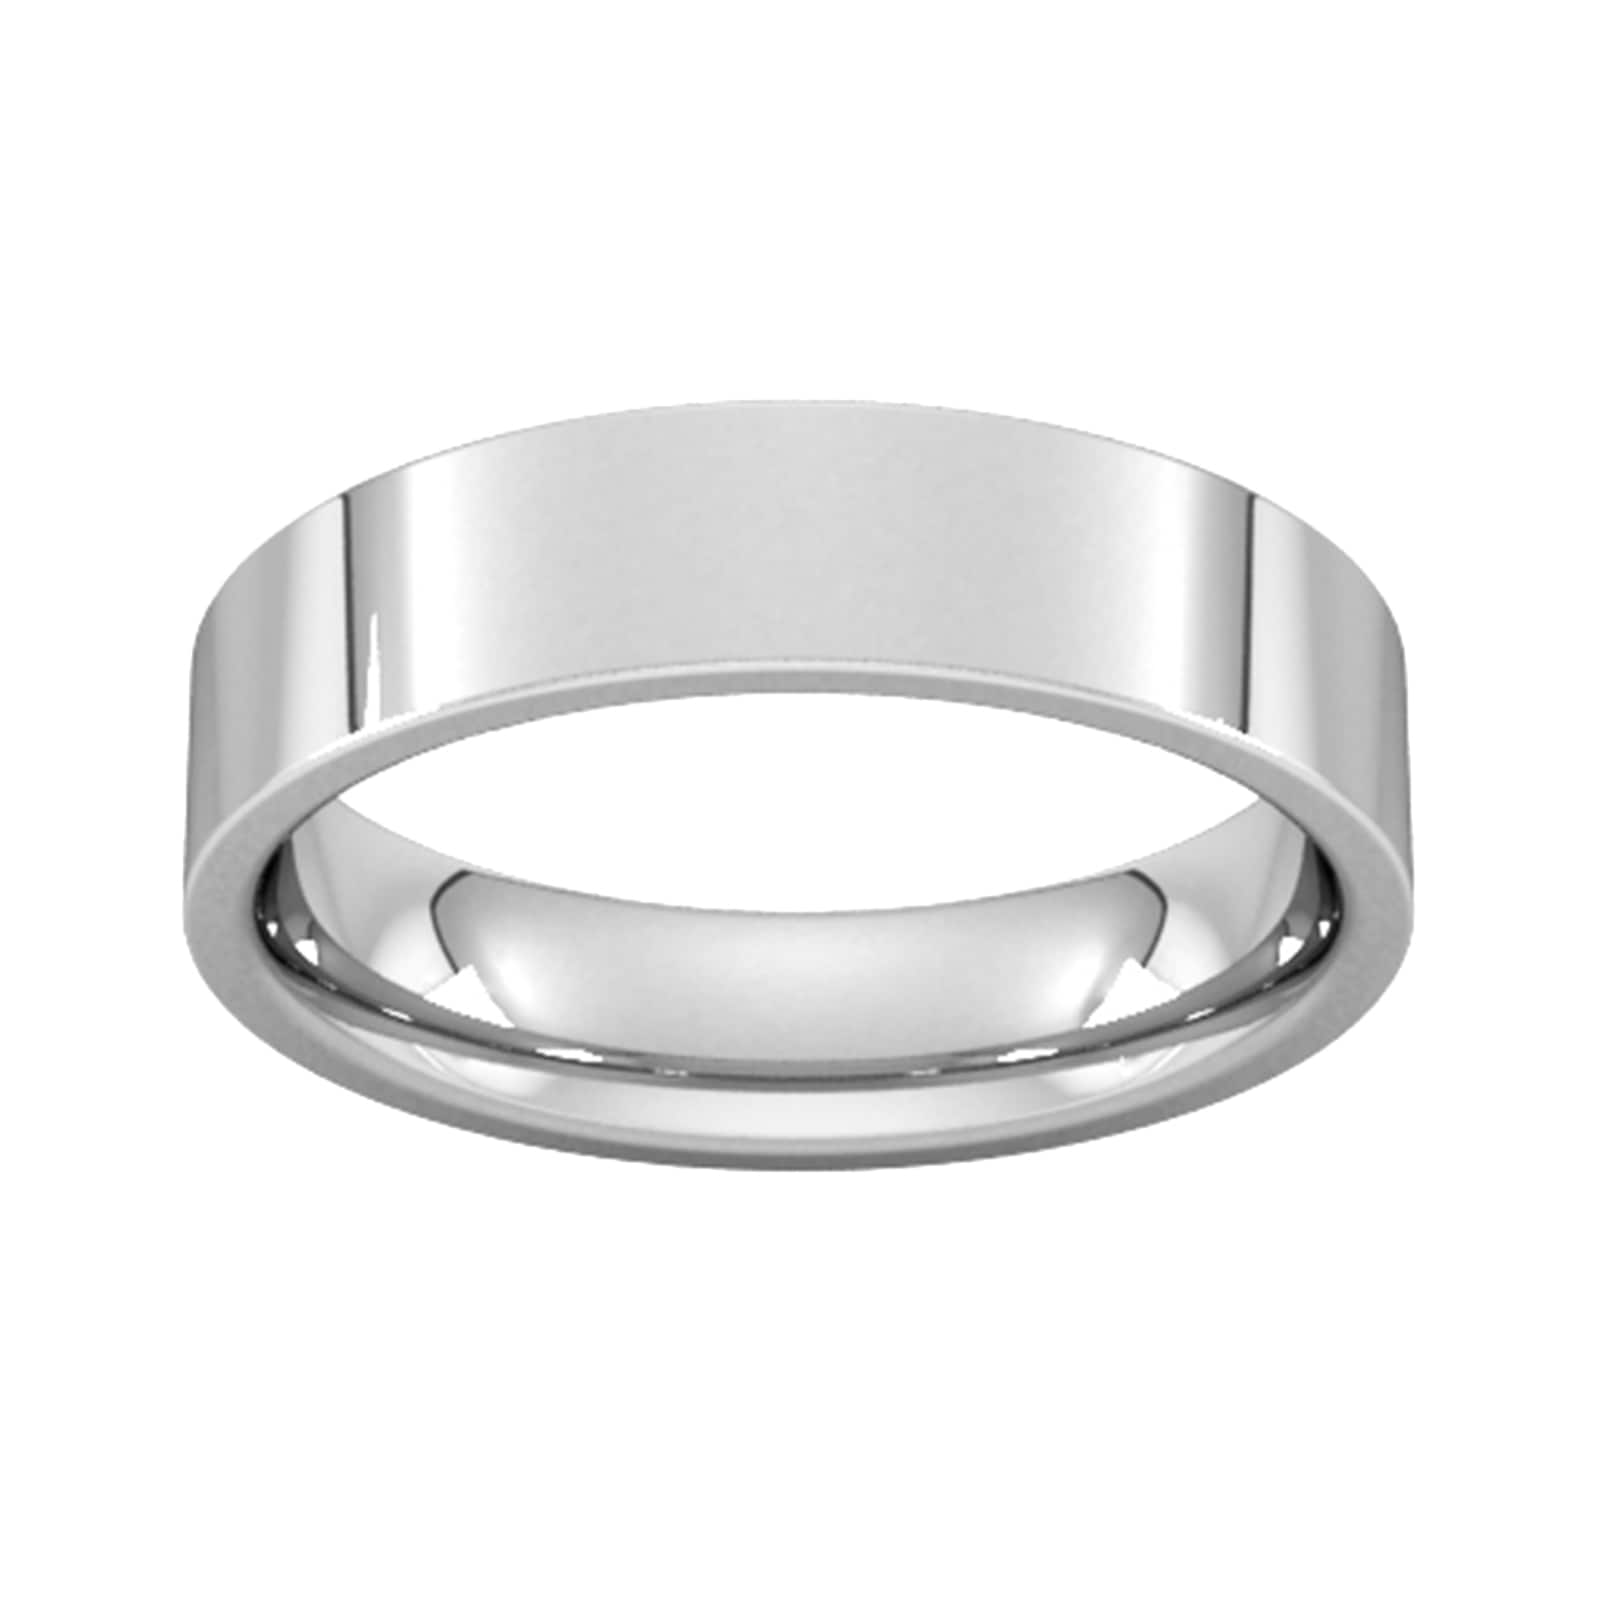 5mm traditional platinum wedding band for men or women